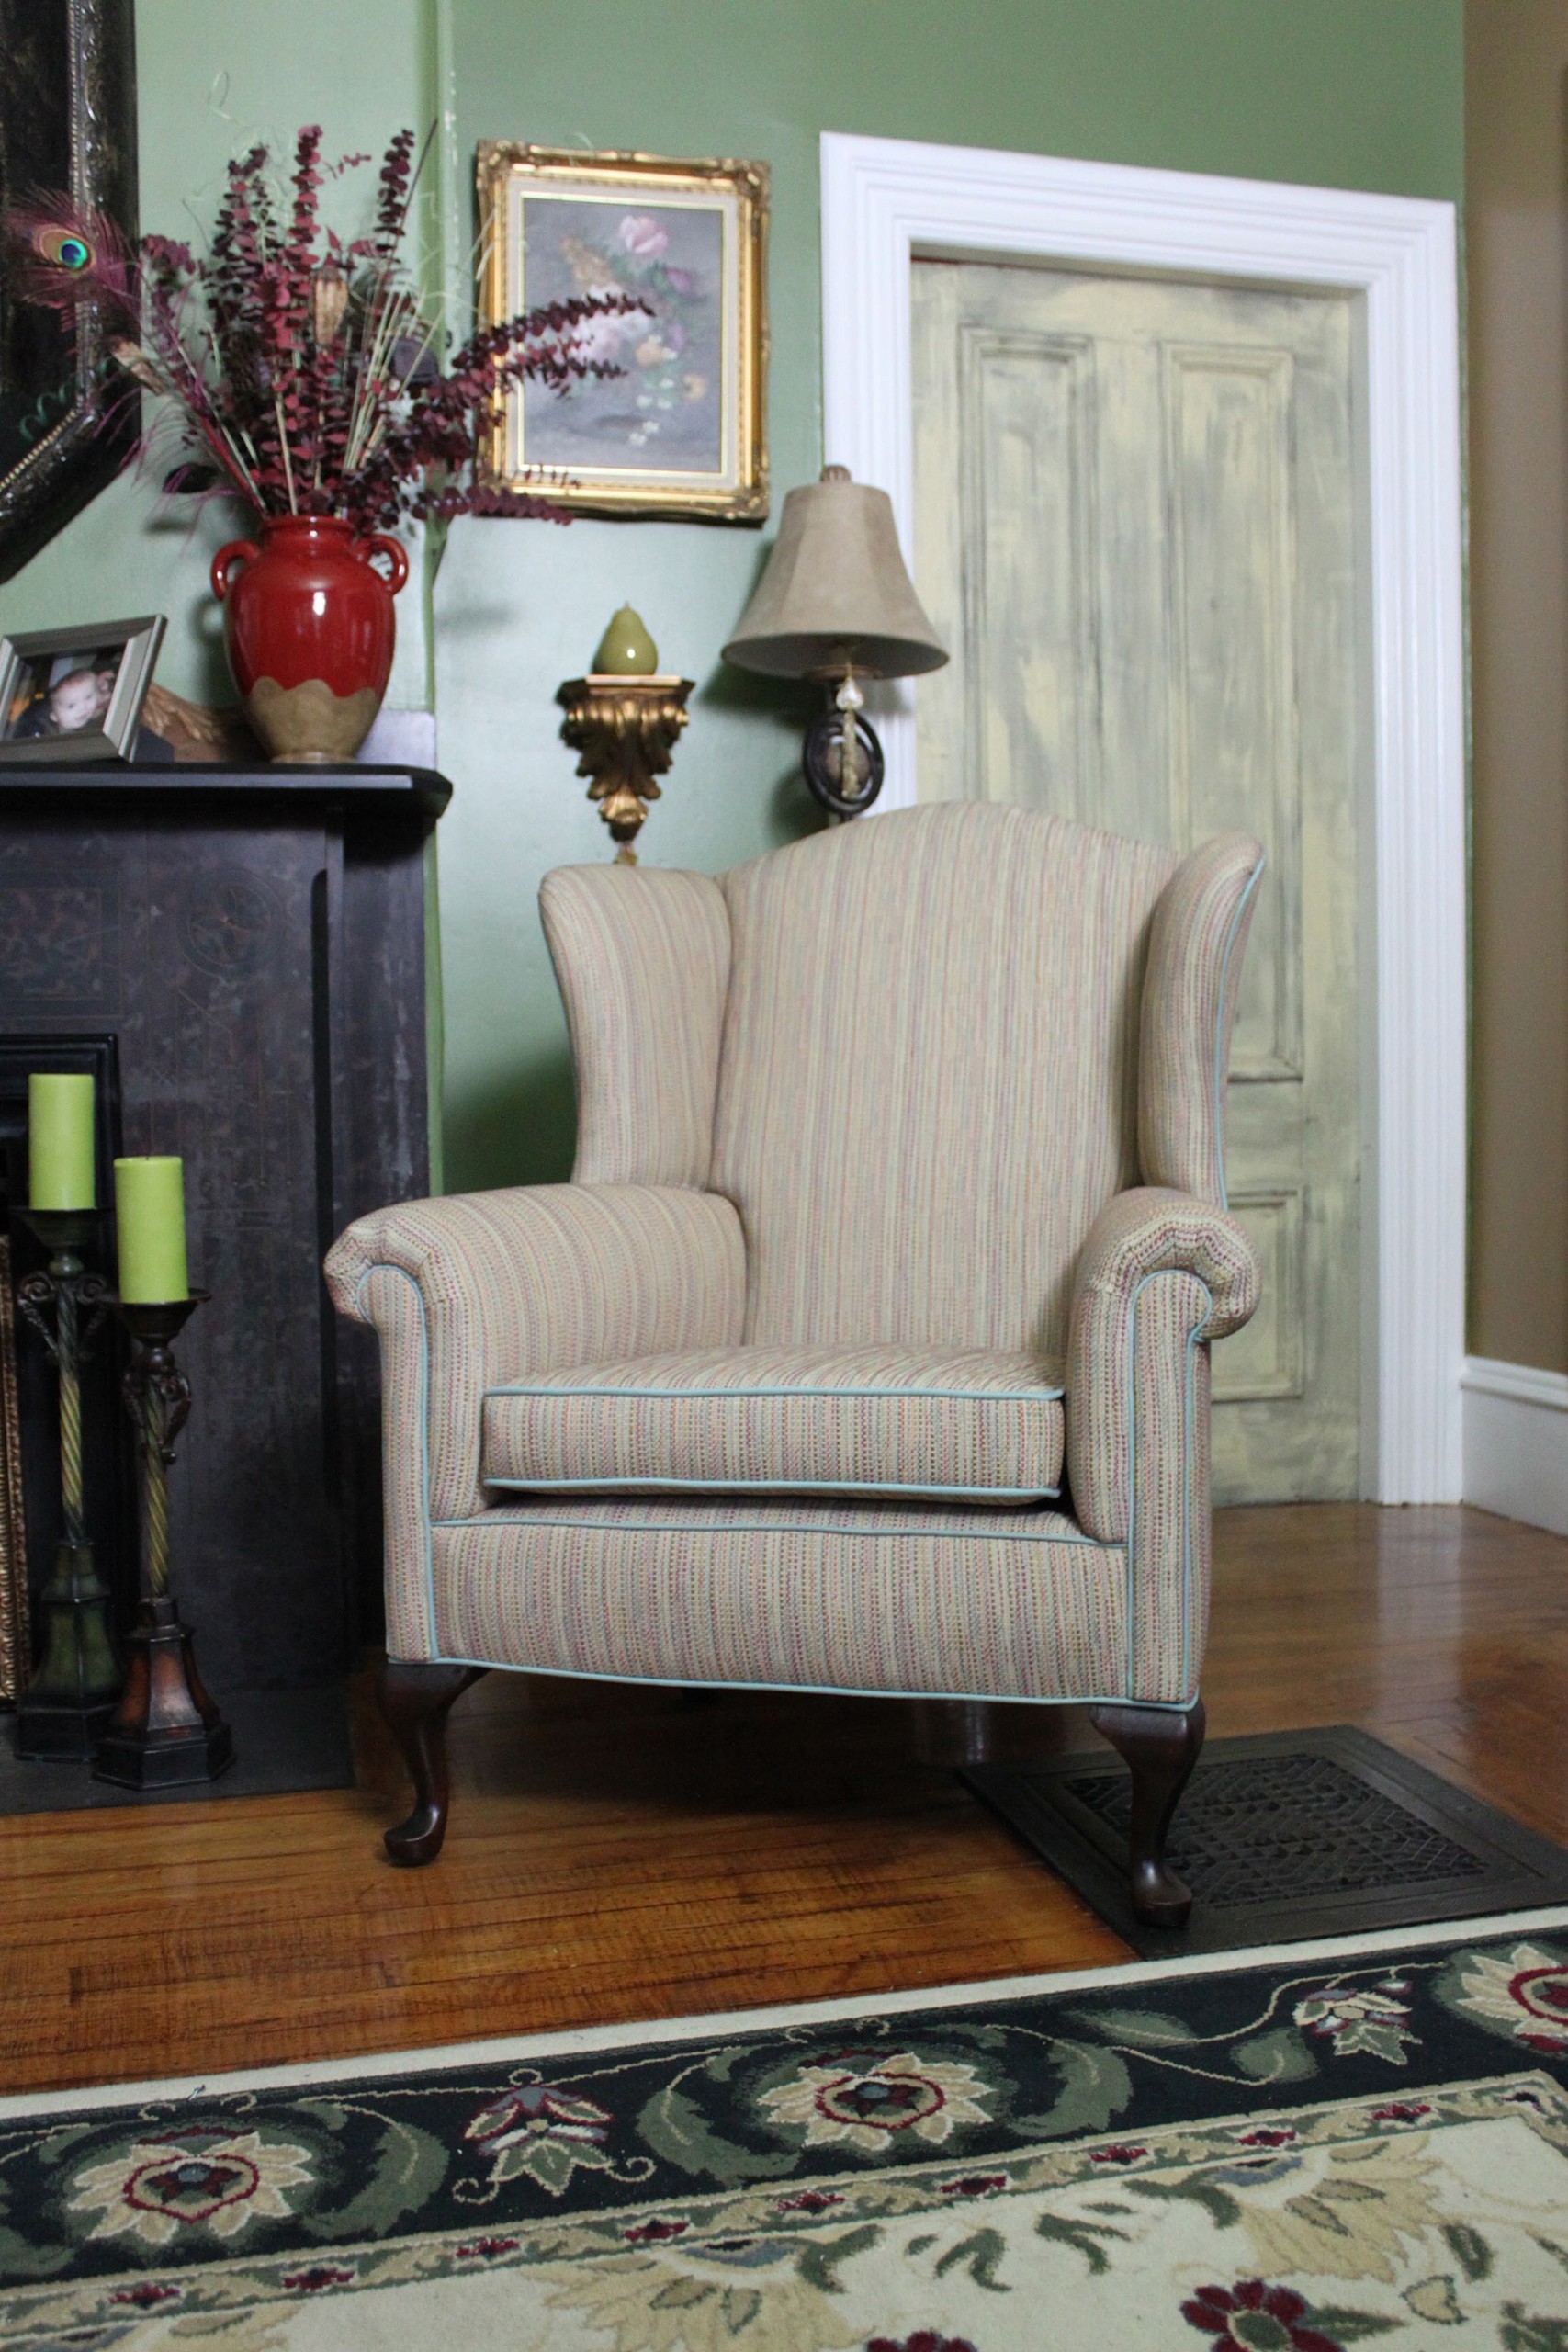 Pinstriped pattern chair with colorful cording